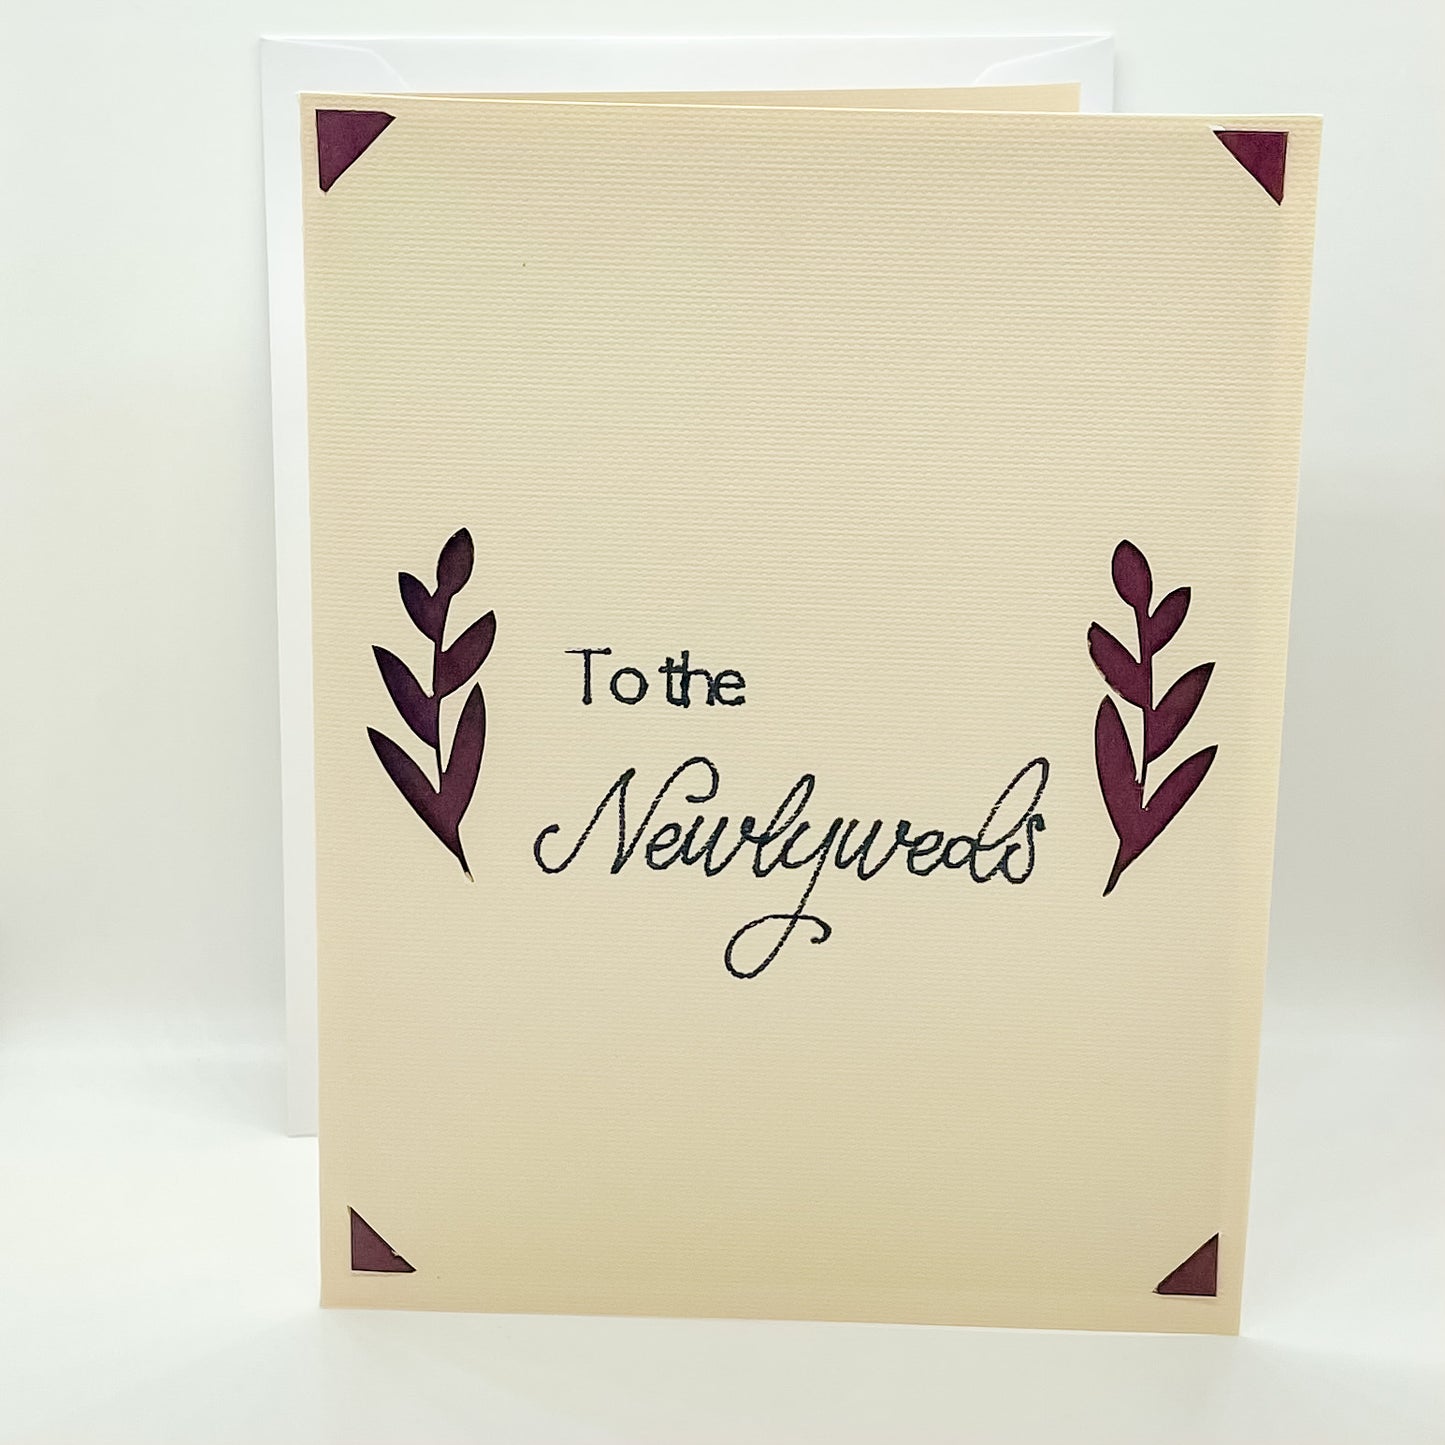 To the Newlyweds Greeting Card